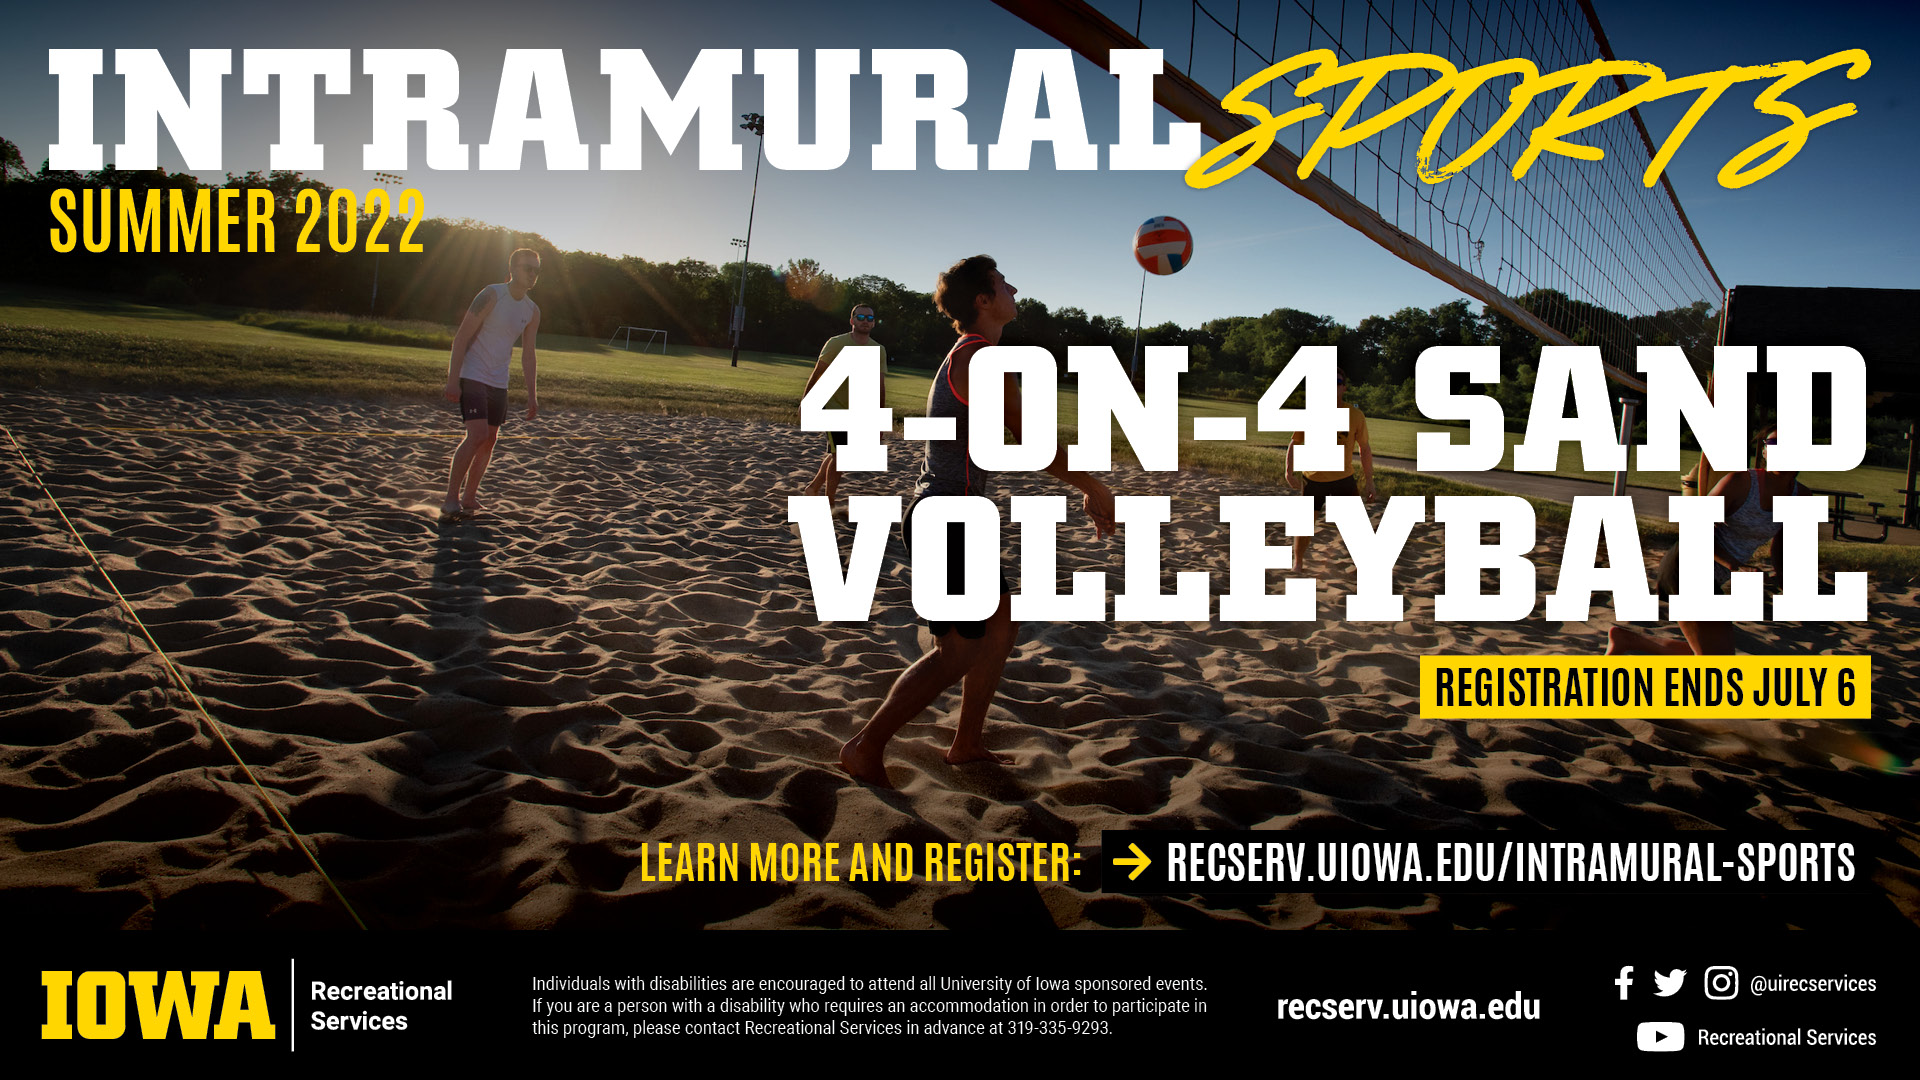 Summer 2022 Intramural 4 on 4 Sand Volleyball. Registration ends July 6. Learn more and register: recserv.uiowa.edu/intramural-sports